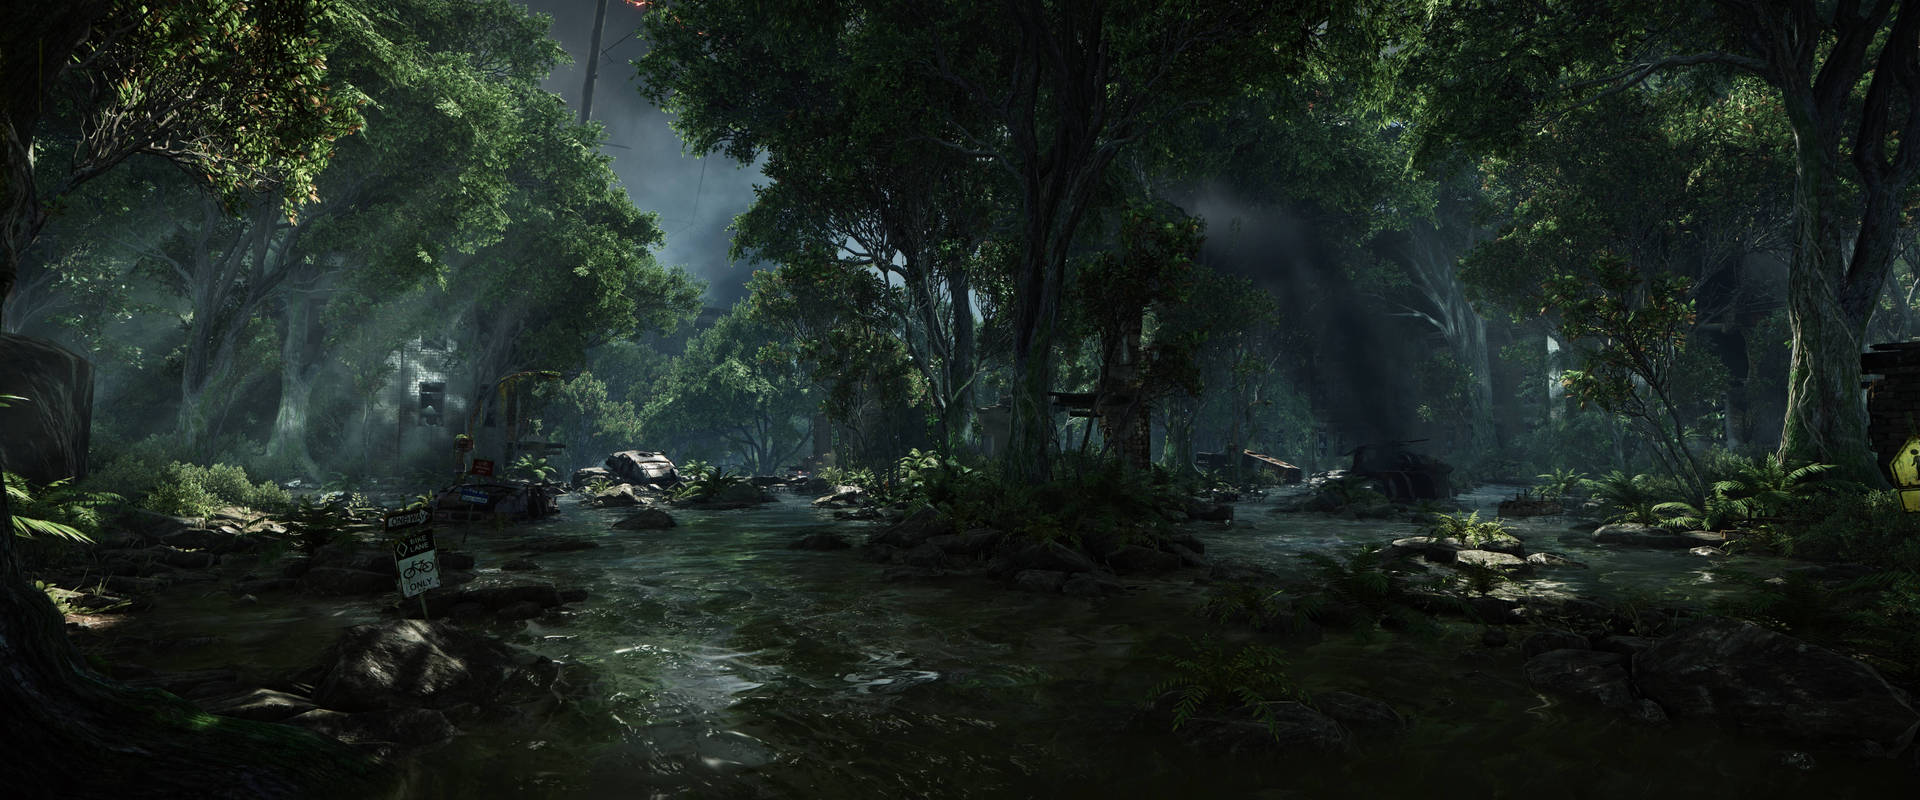 Dual Monitor Crysis Forest